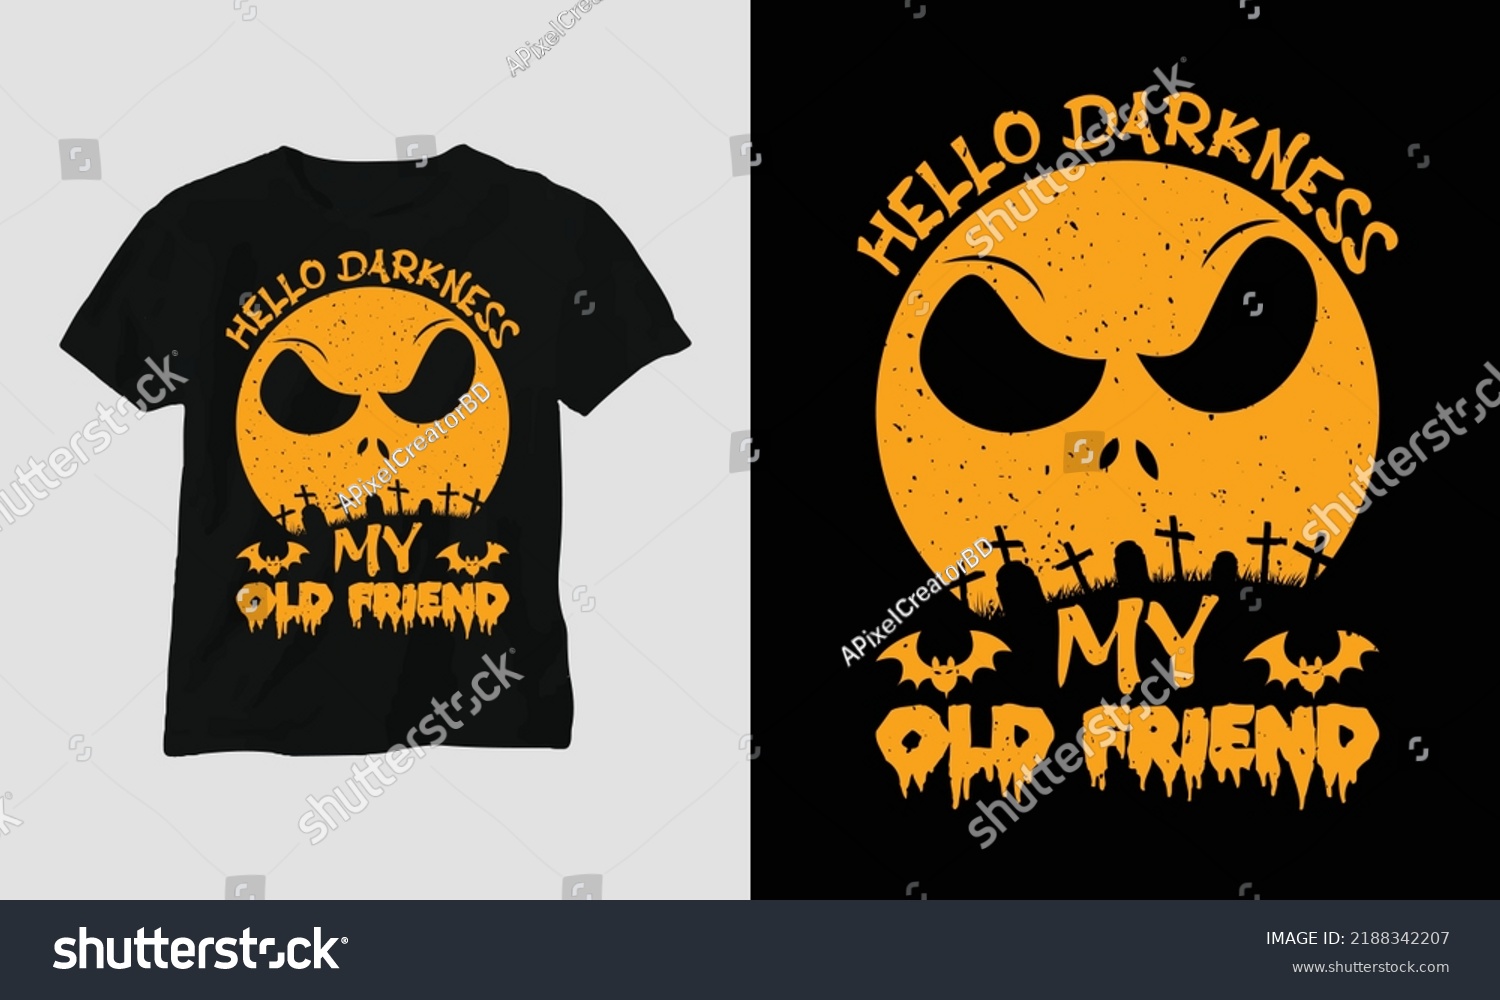 SVG of Halloween Day Special T-shirt Graphic with “hello darkness my old friend” Design vector Graphic Design T-Shirt, mag, sticker, wall mat, etc. Design vector Graphic Template svg